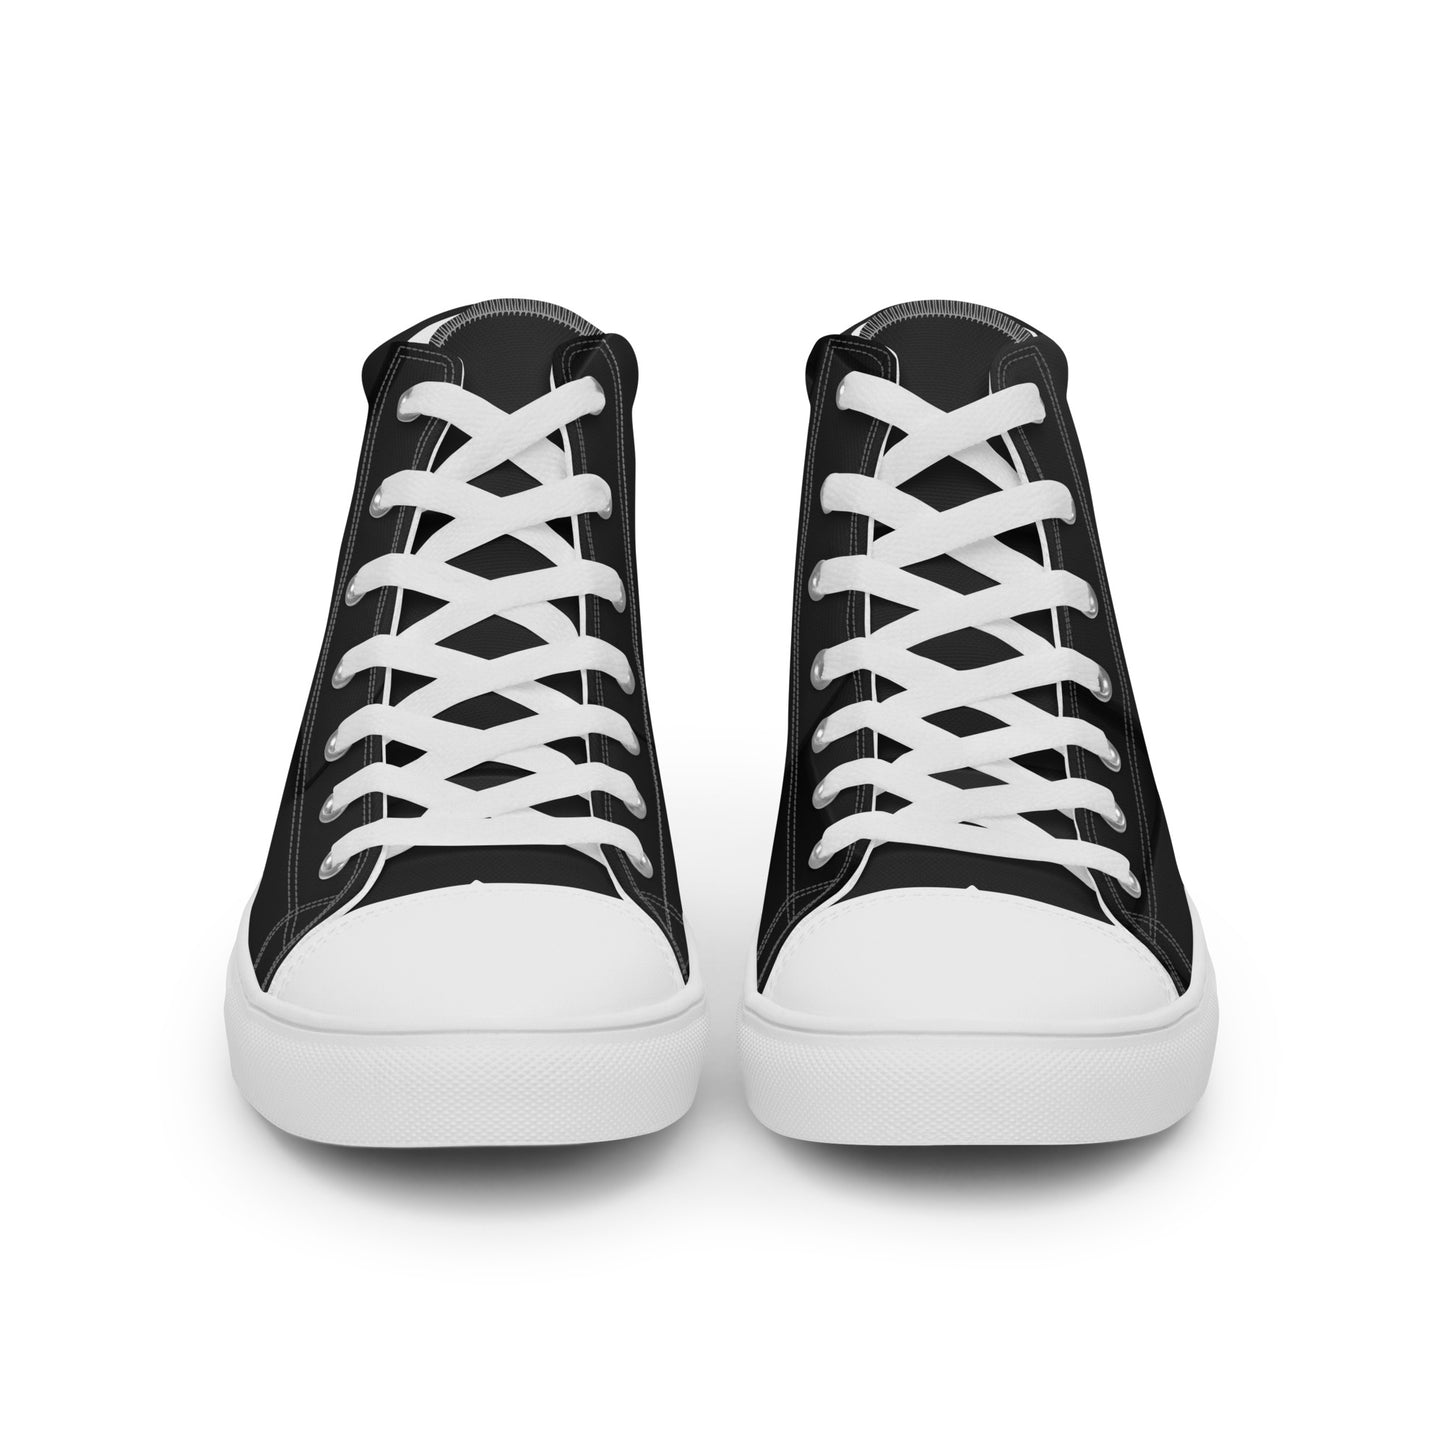 Squares high top canvas shoes